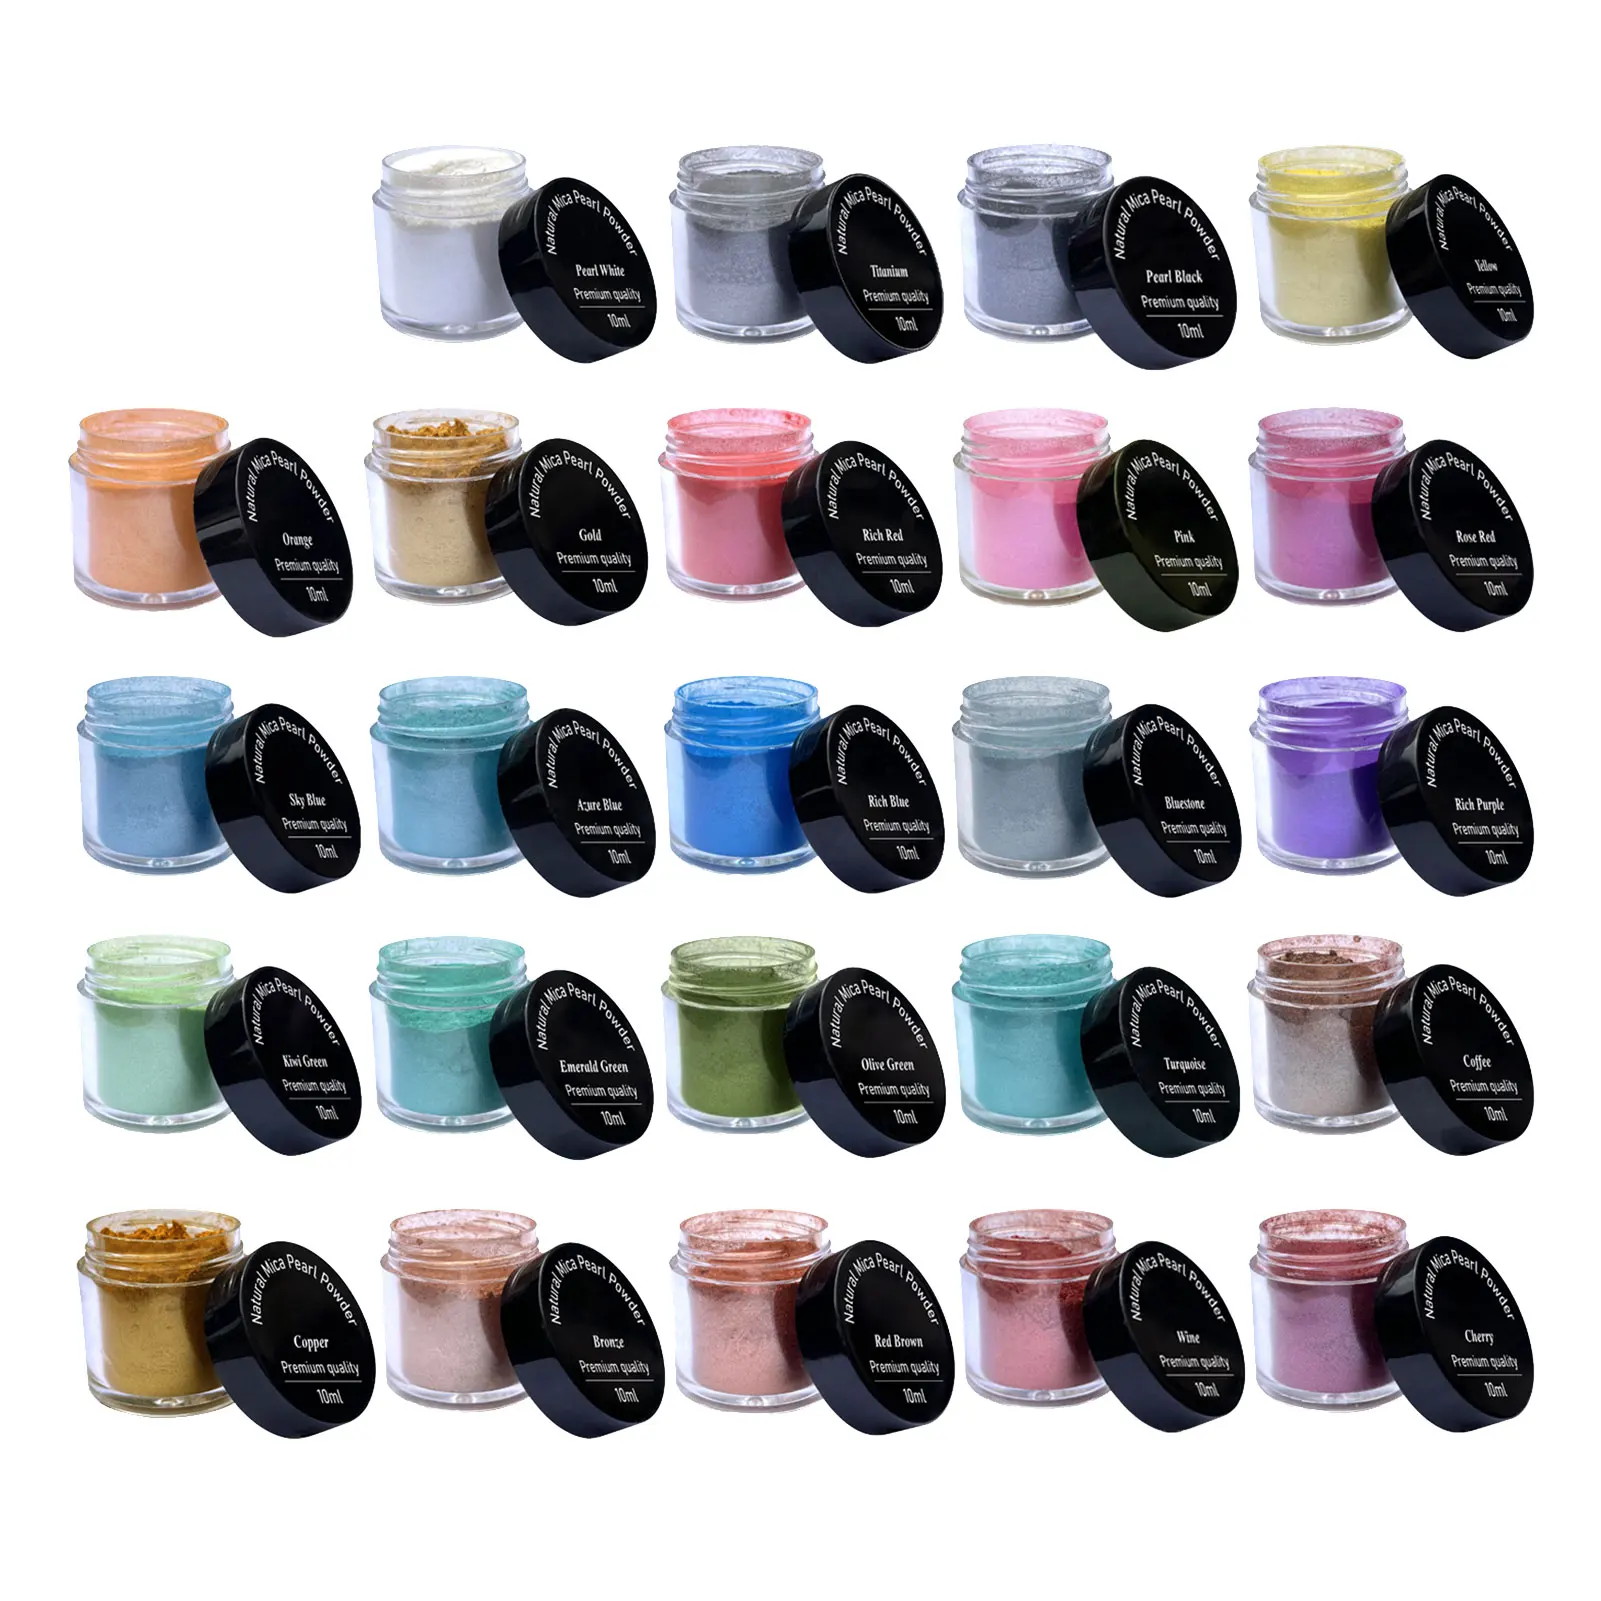 

24 Colors Mica Powders 0.35oz 10g/Bottle Natural Mica Pigment Epoxy Resin Powder Dye Colouring For Soap Candles Resin Jewelry